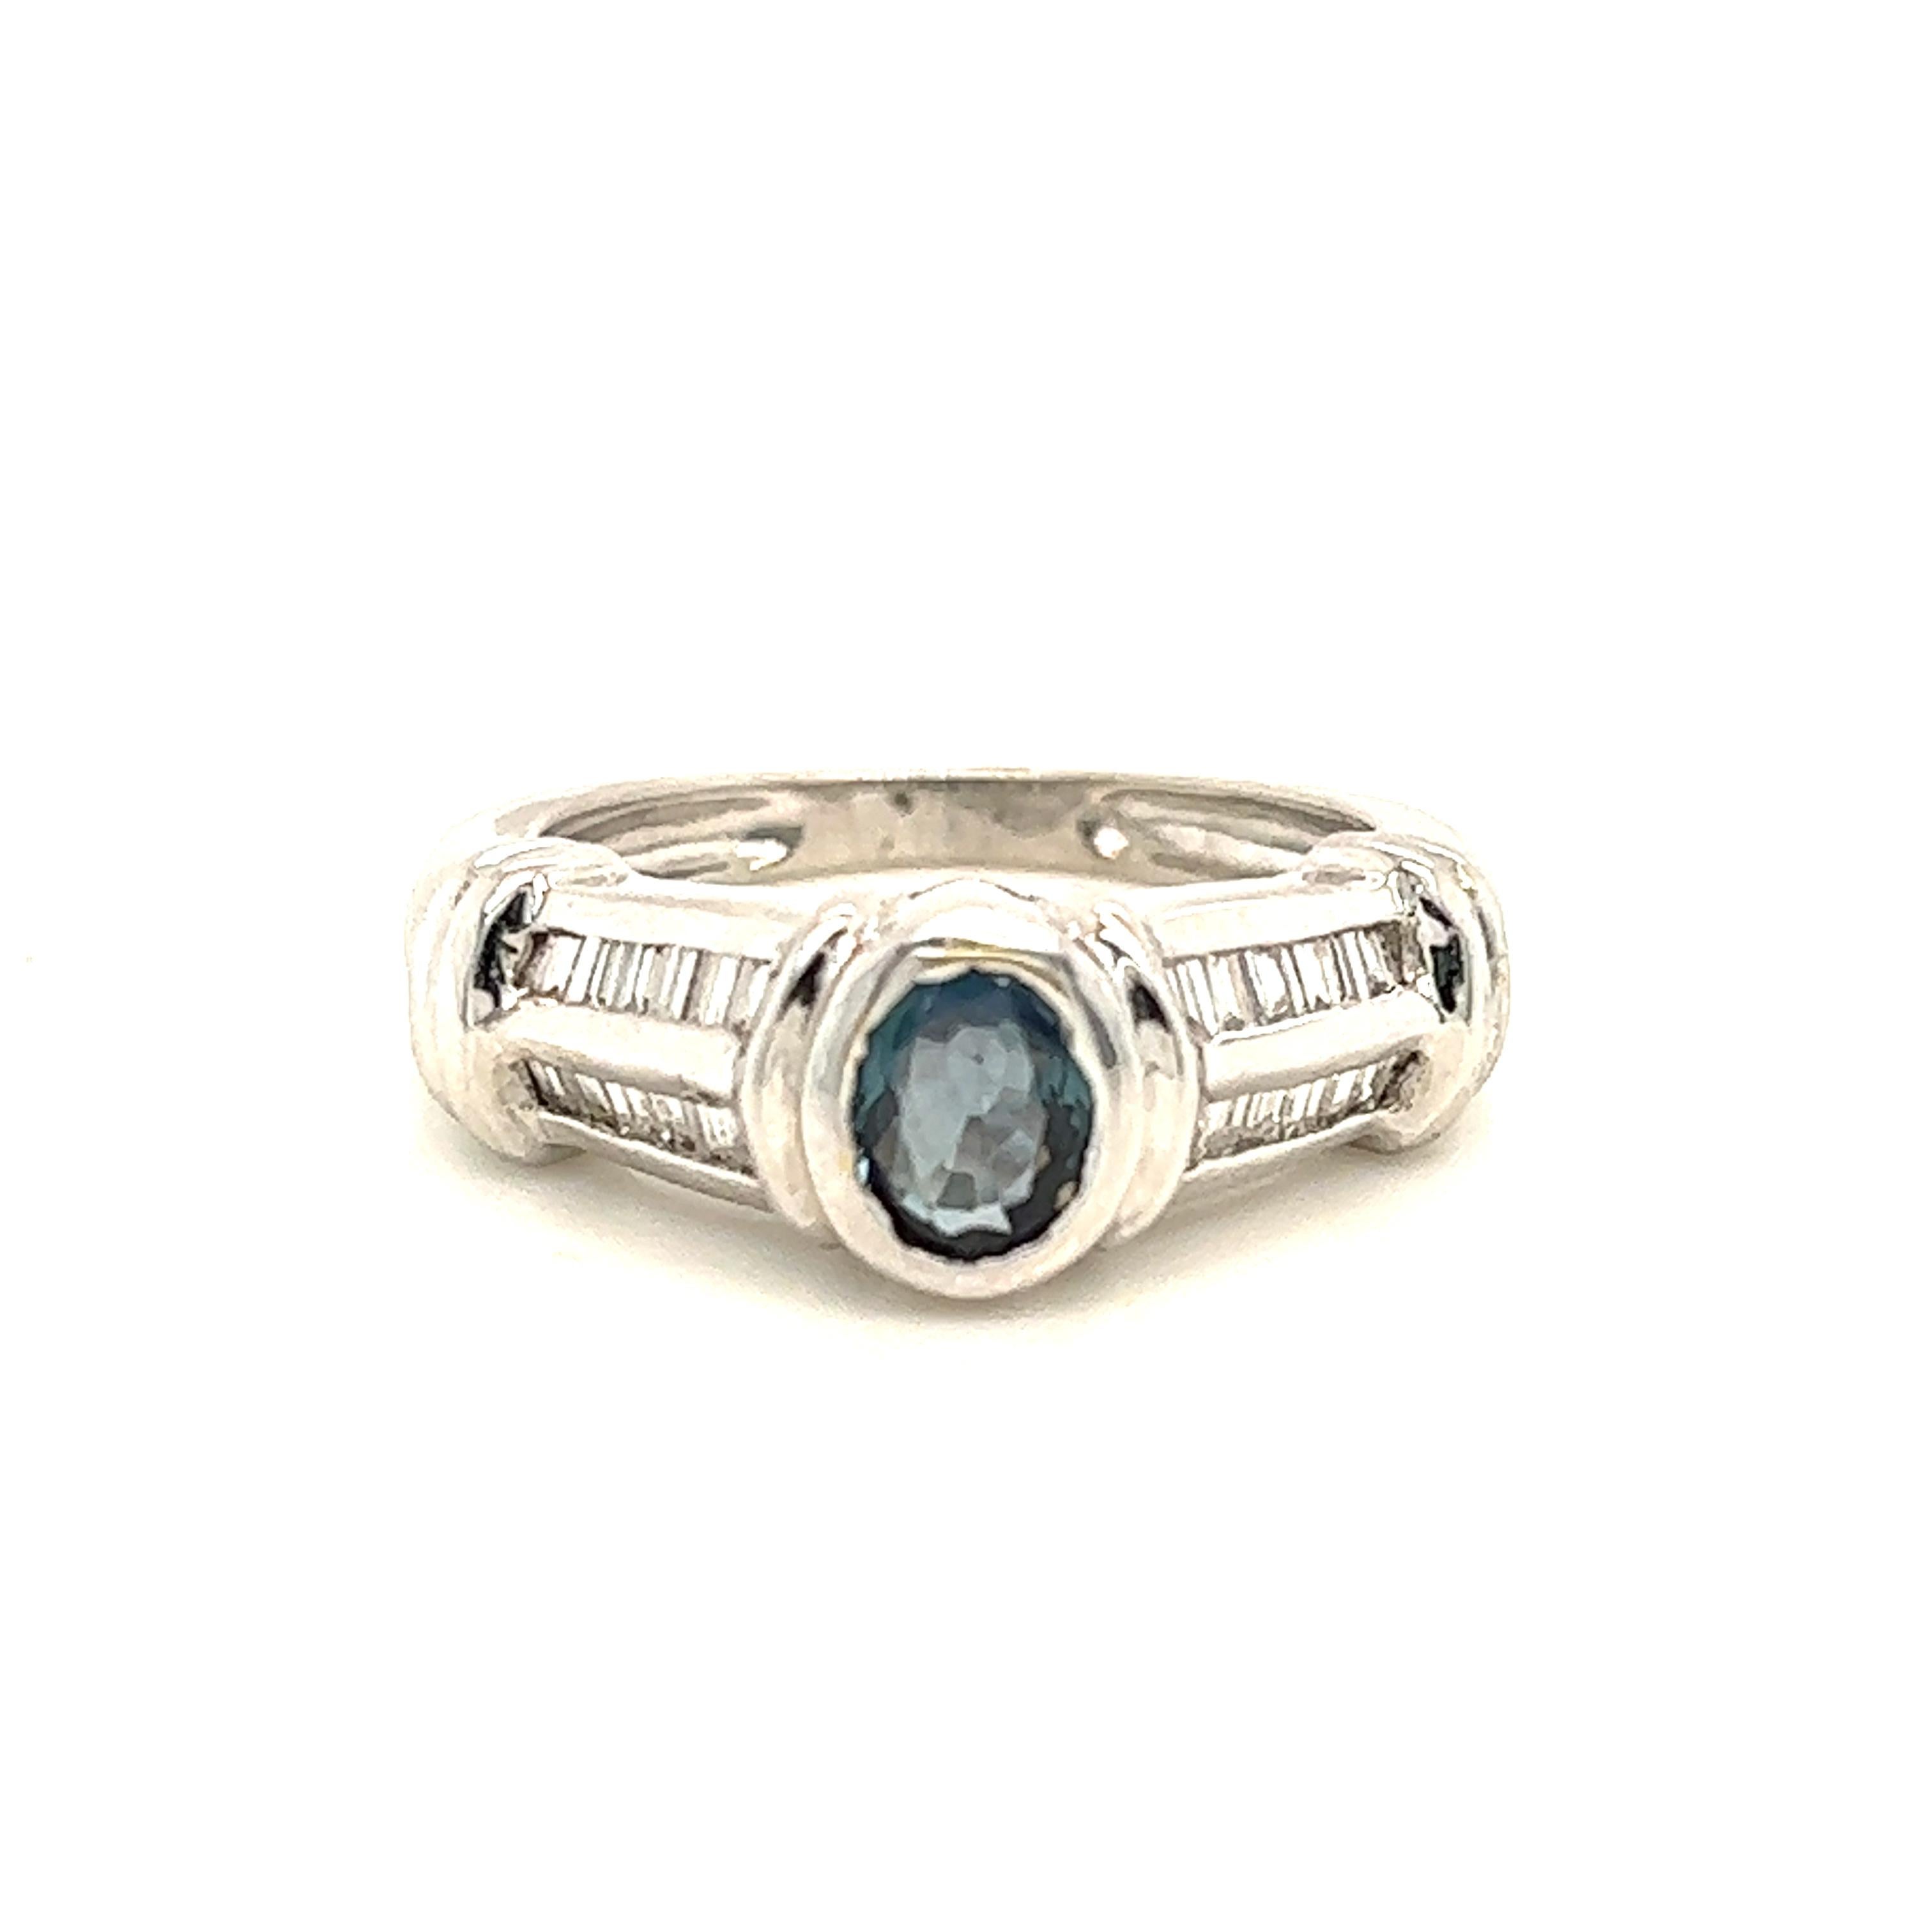 This is a gorgeous natural AAA quality oval Alexandrite surrounded by dainty diamonds that is set in a vintage White Gold setting. This ring features a natural 0.82 carat oval alexandrite that is certified by the Gemological Institute of America